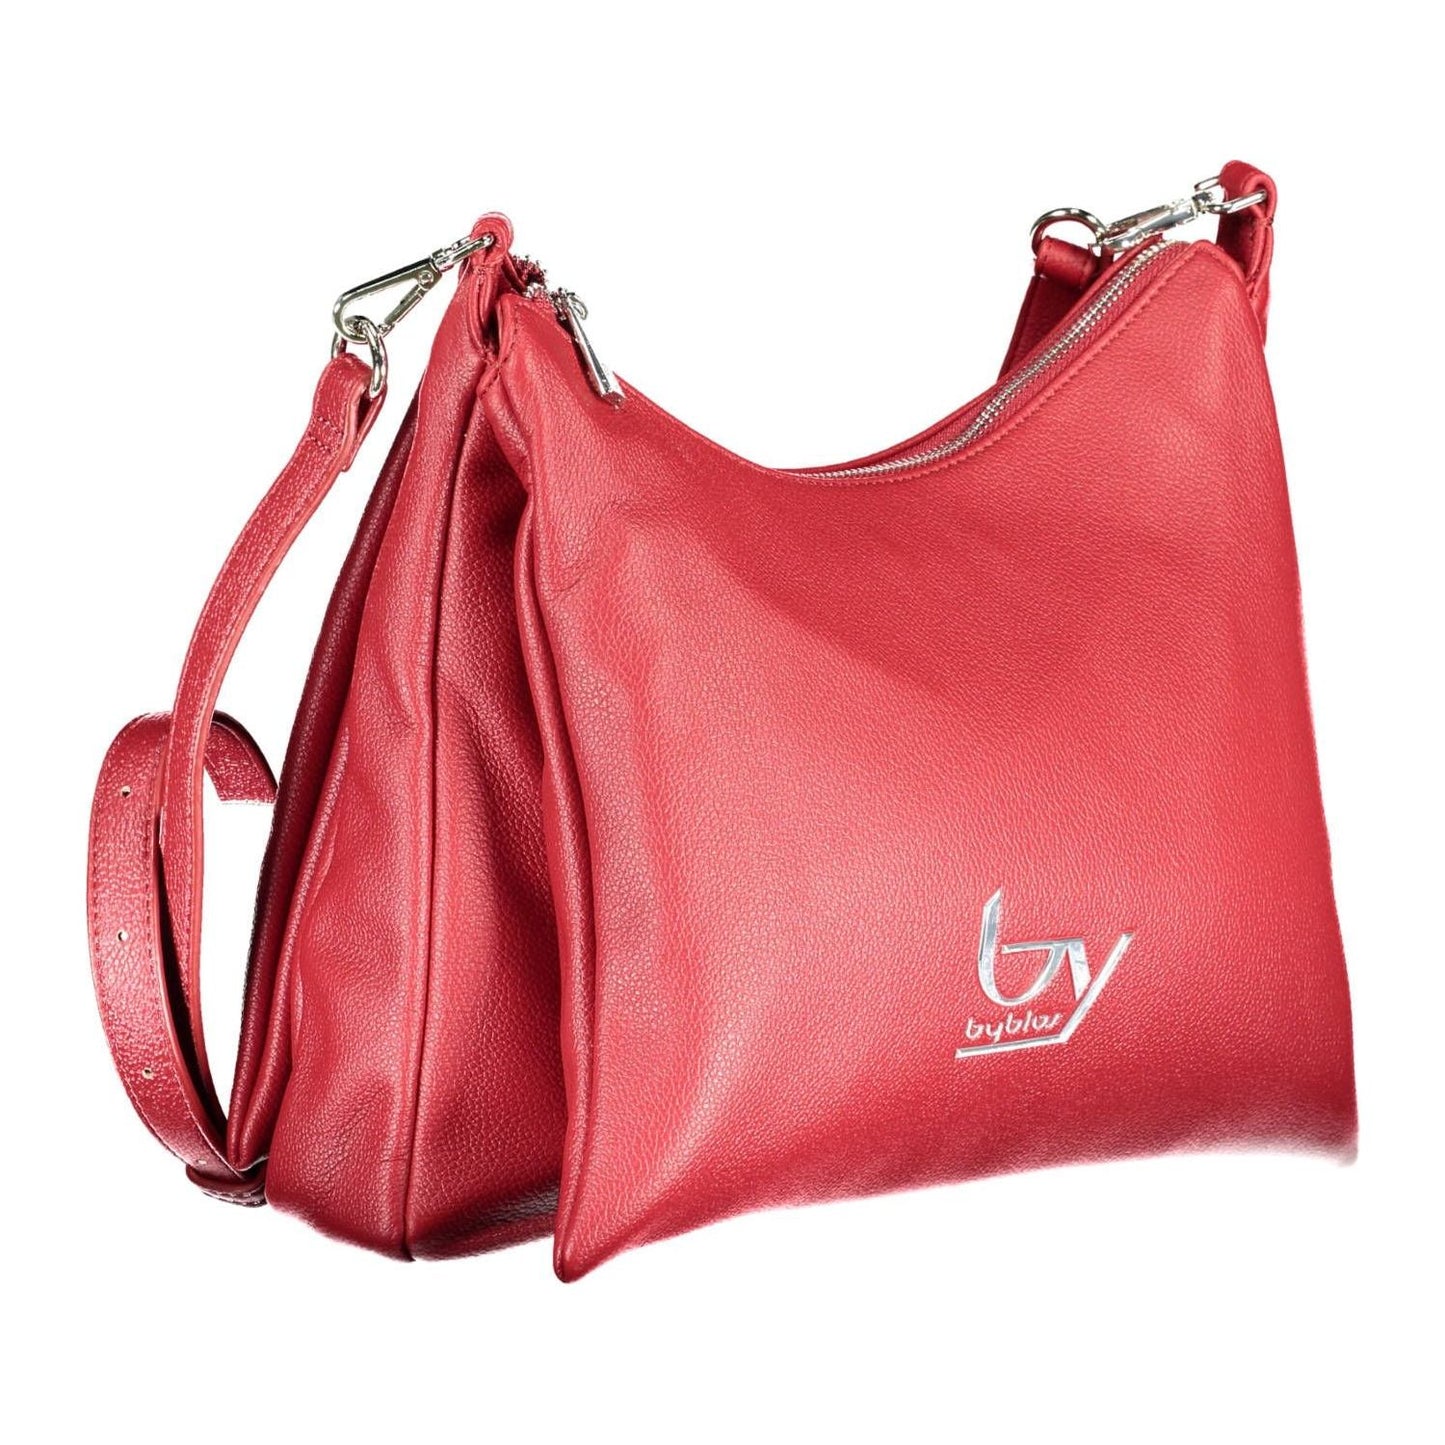 BYBLOS Elegant Red Chain-Handle Convertible Handbag elegant-red-chain-handle-convertible-handbag